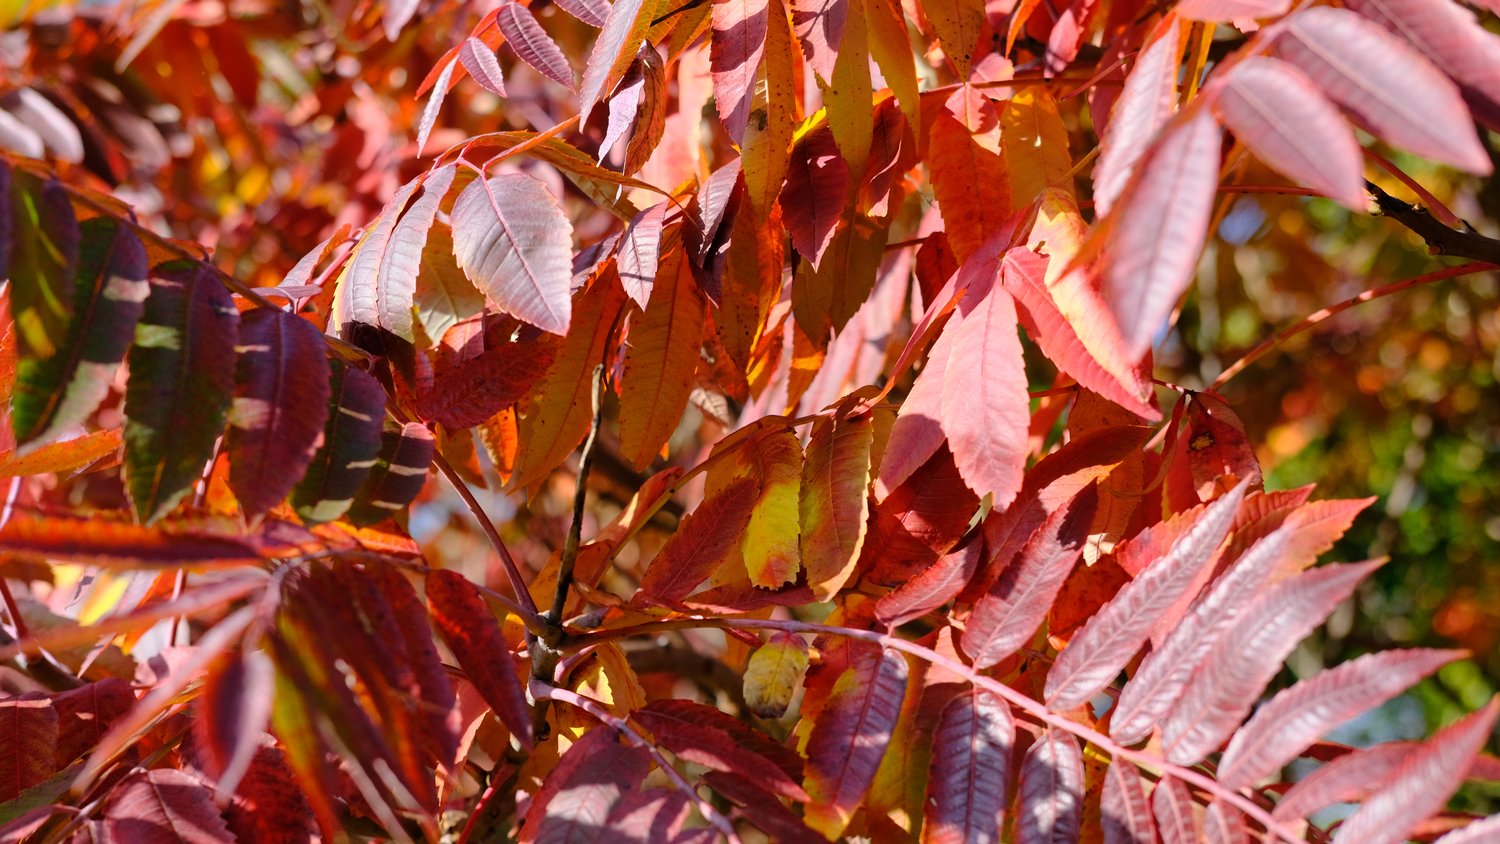 Red and yellow sumac leaves.